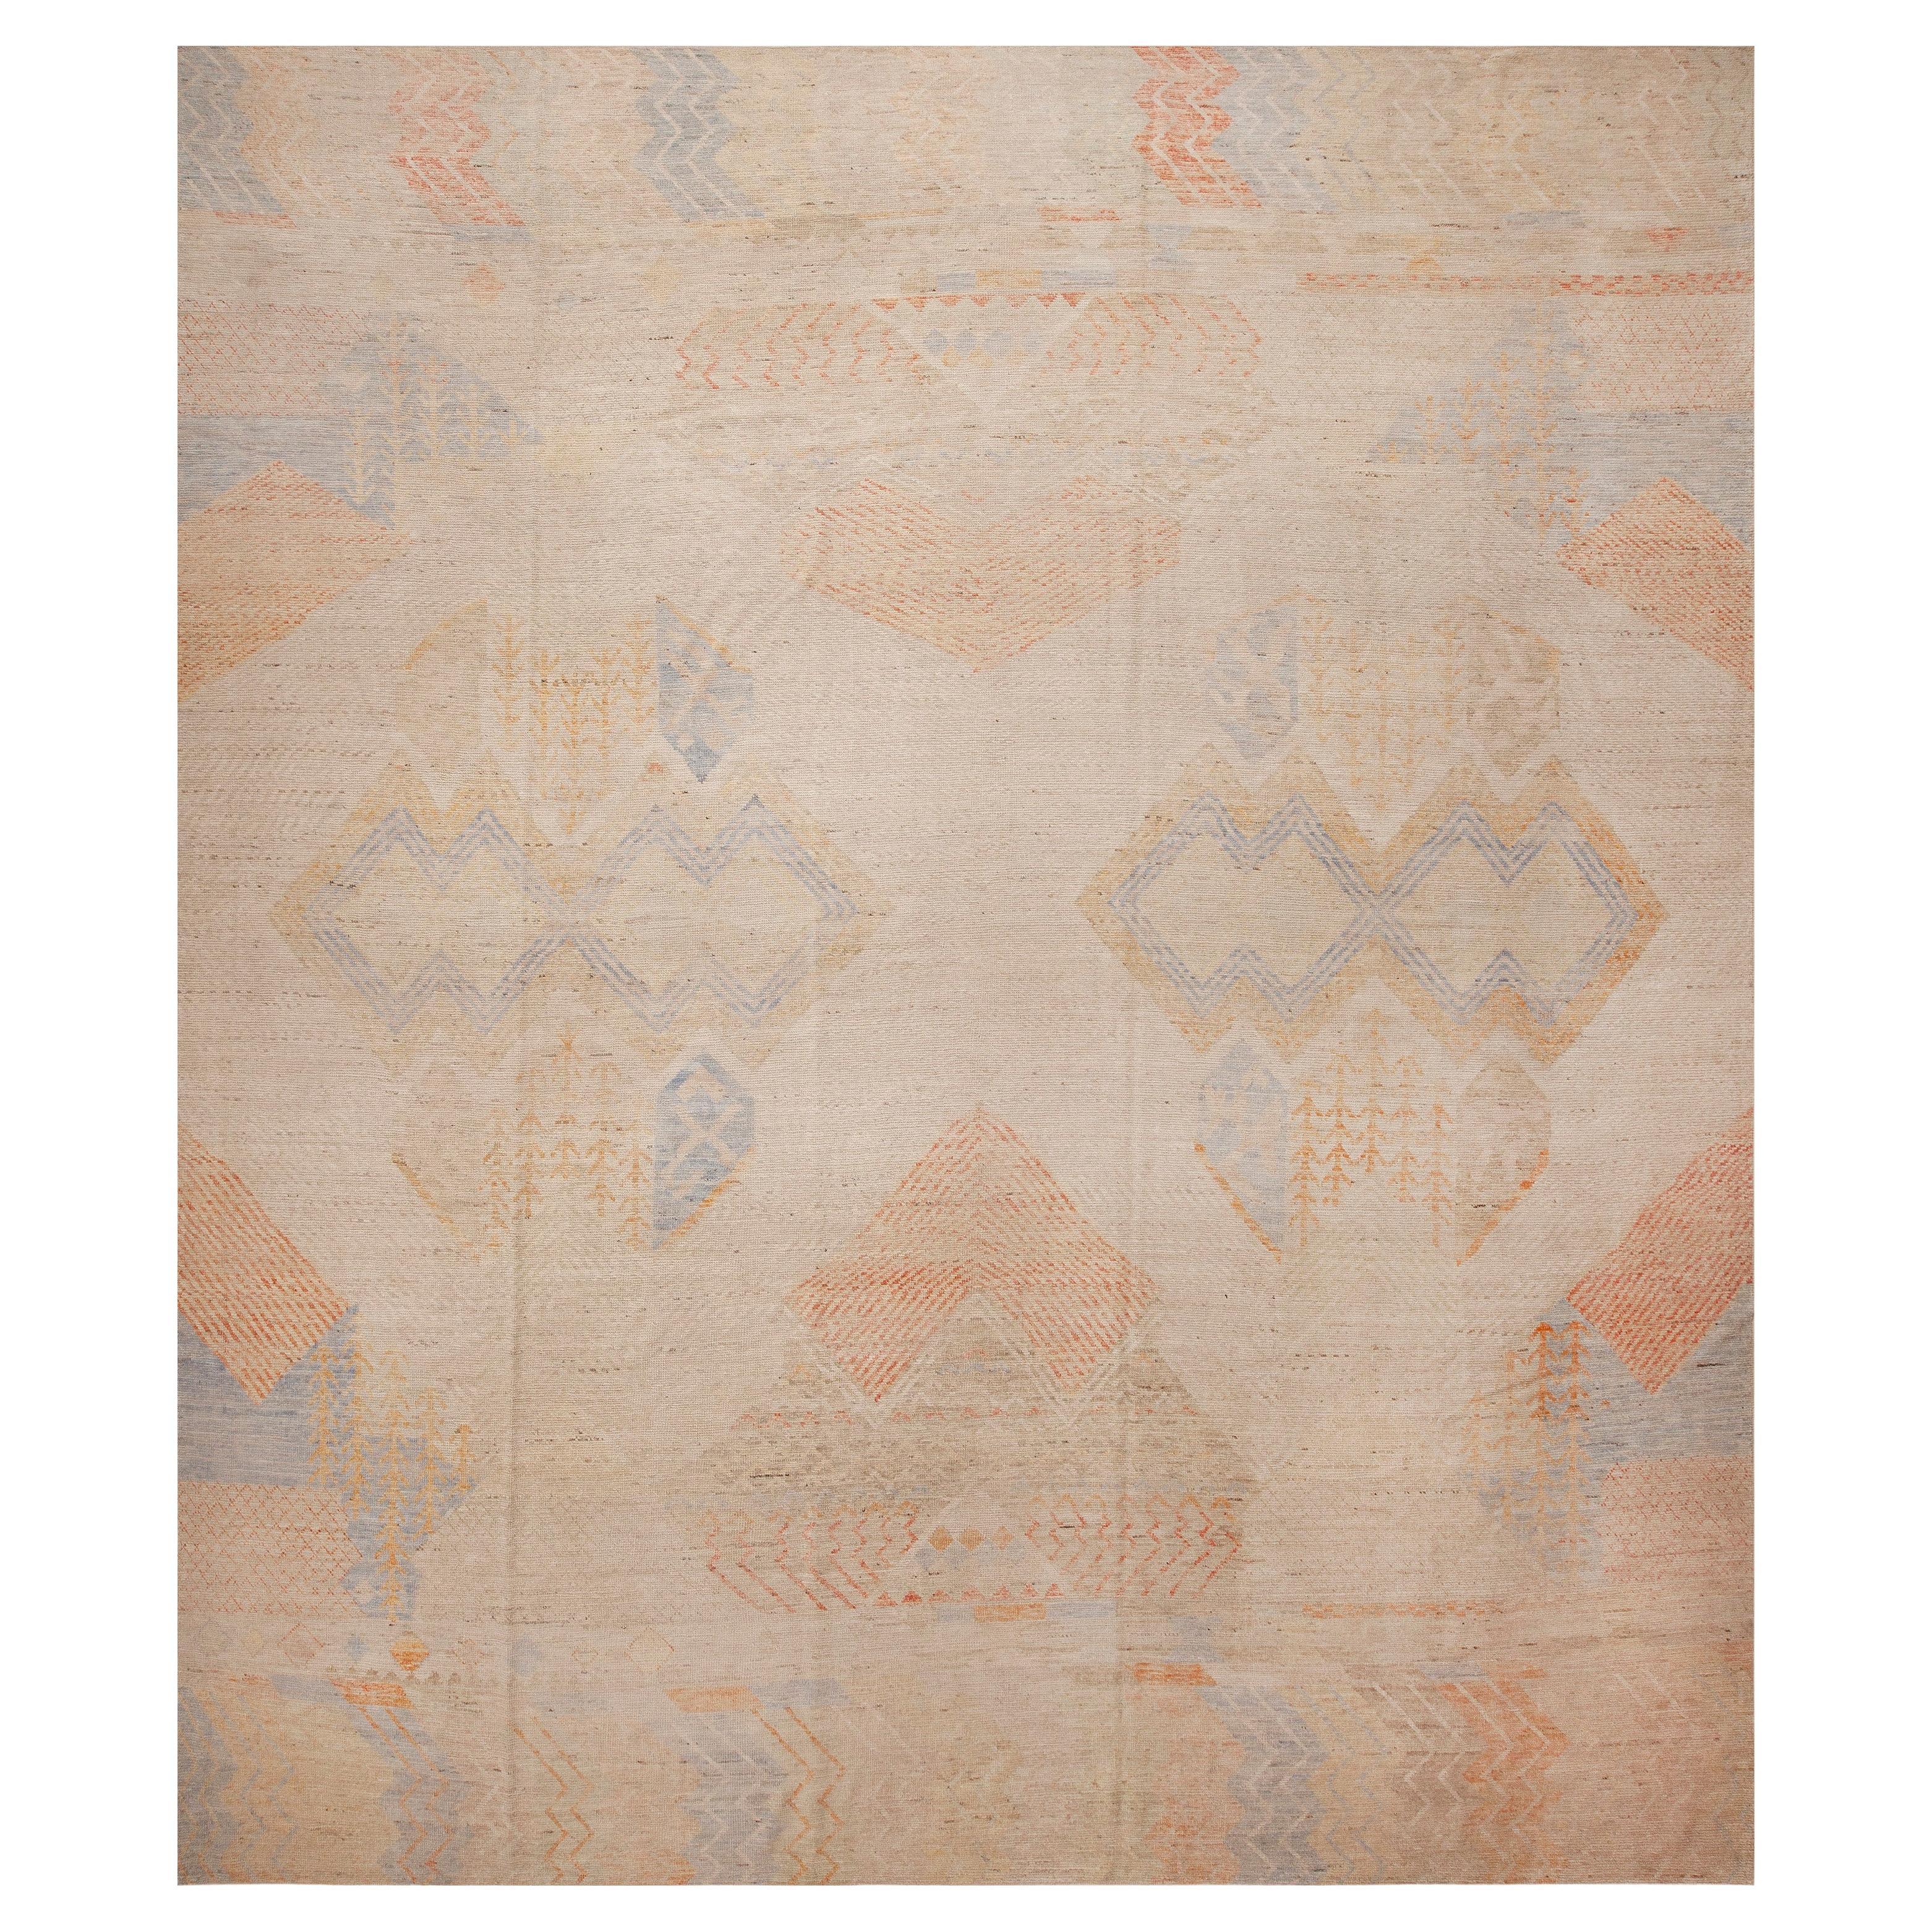 Collection Nazmiyal collection Rustic Tribal Geometric Design Modern Area Rug 14' x 16'2" en vente